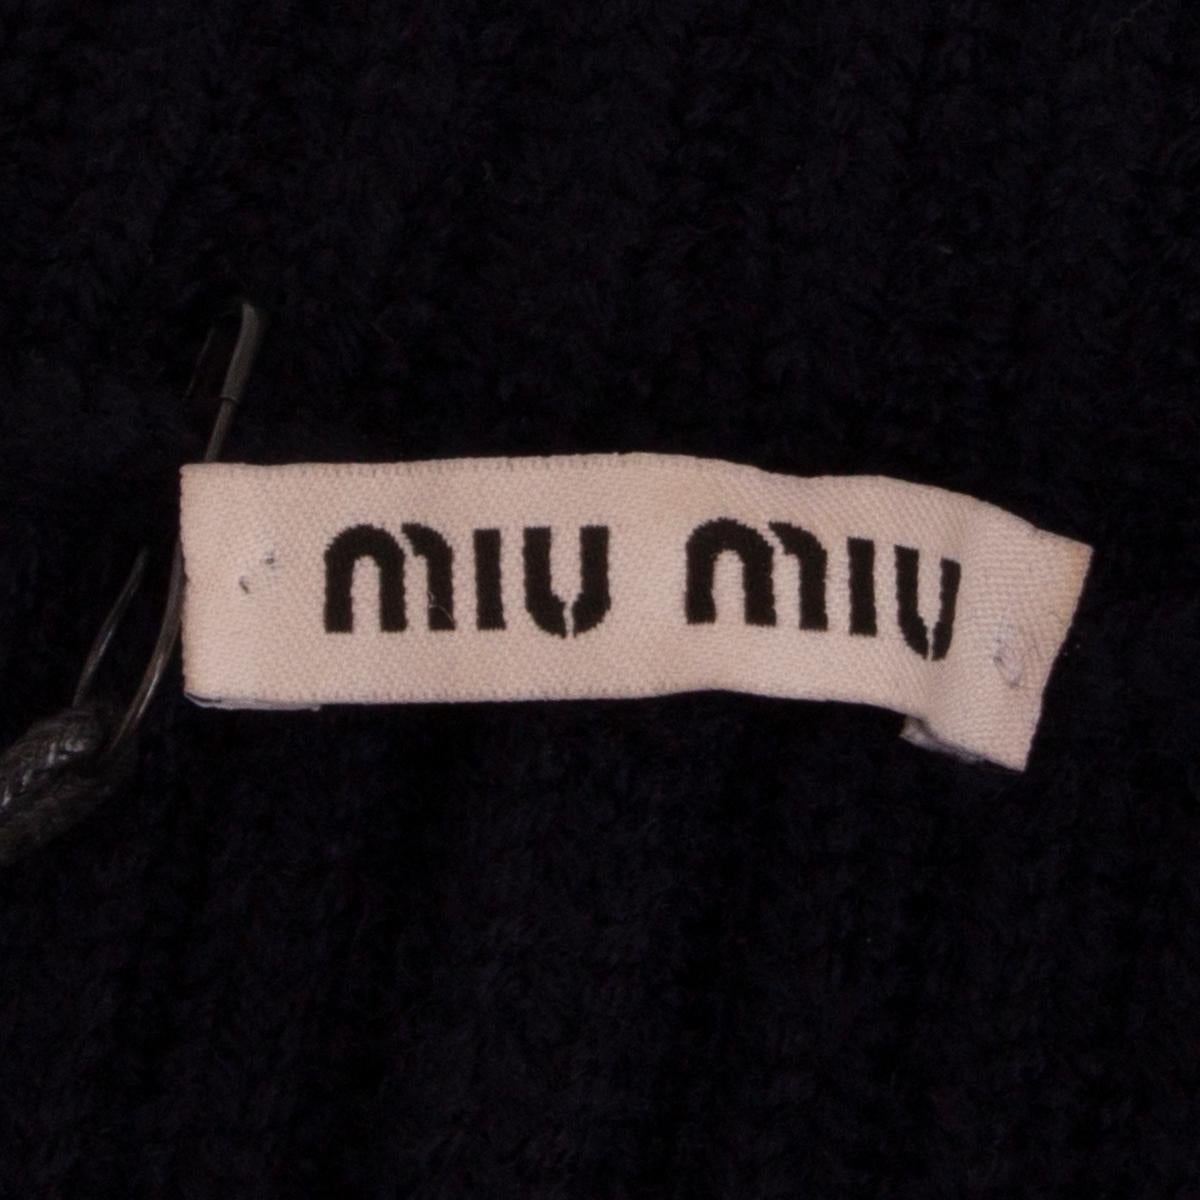 MIU MIU midnight blue wool RIB ZIP FRONT KNIT Coat Jacket 42 M In Excellent Condition For Sale In Zürich, CH